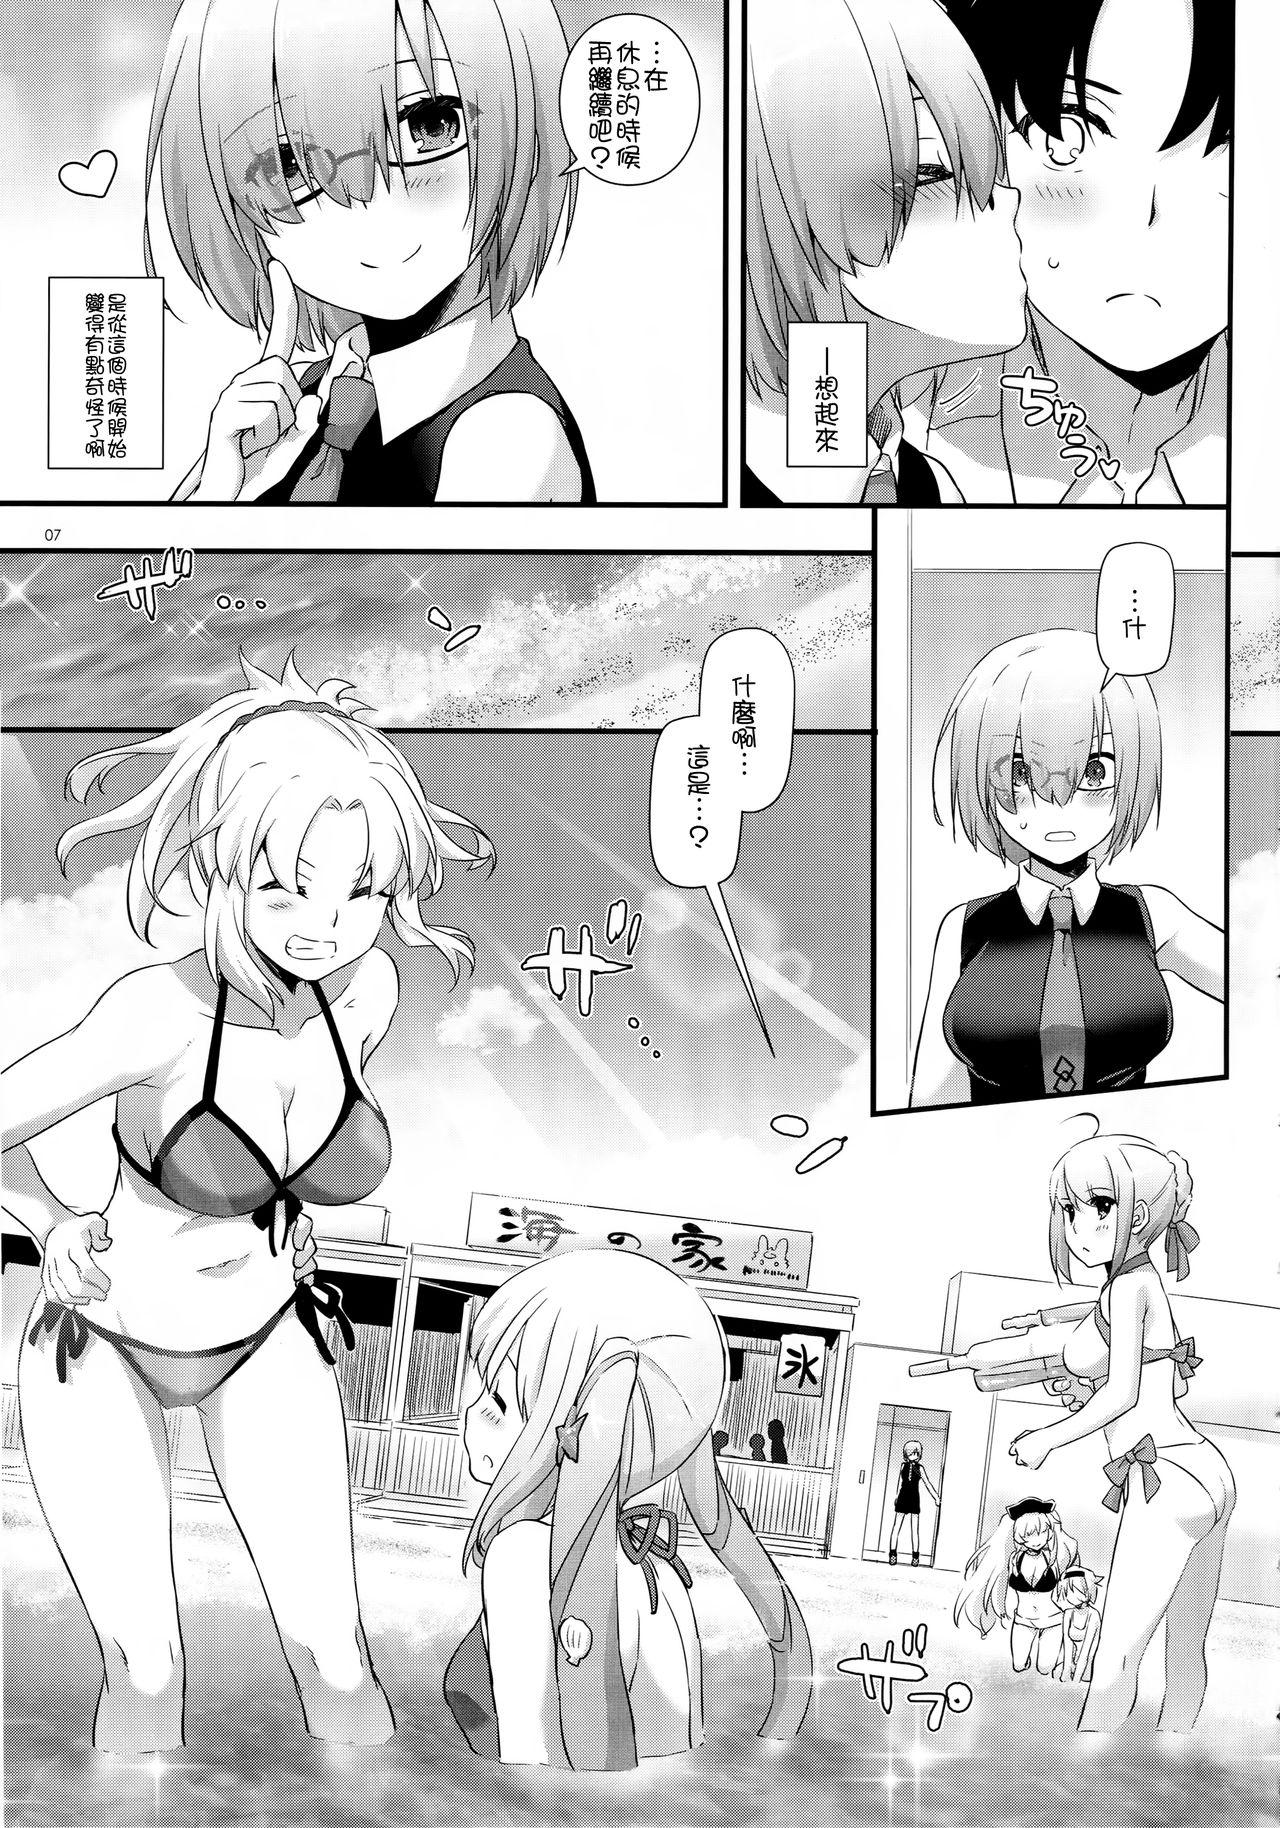 Funny D.L. action 116 - Fate grand order Pov Sex - Page 7